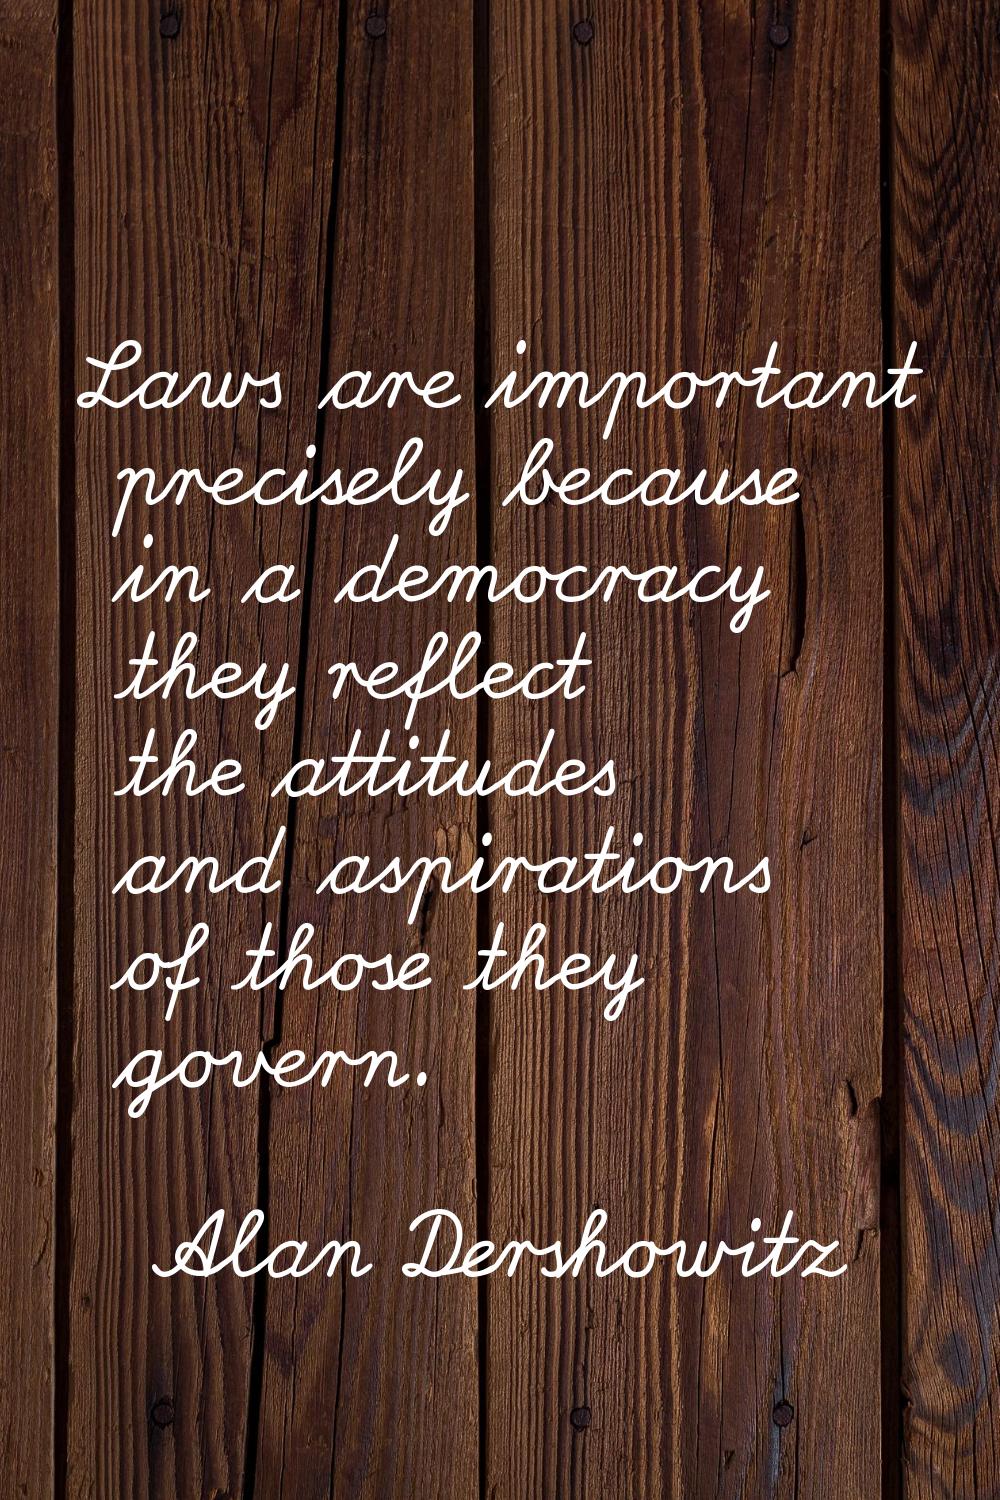 Laws are important precisely because in a democracy they reflect the attitudes and aspirations of t